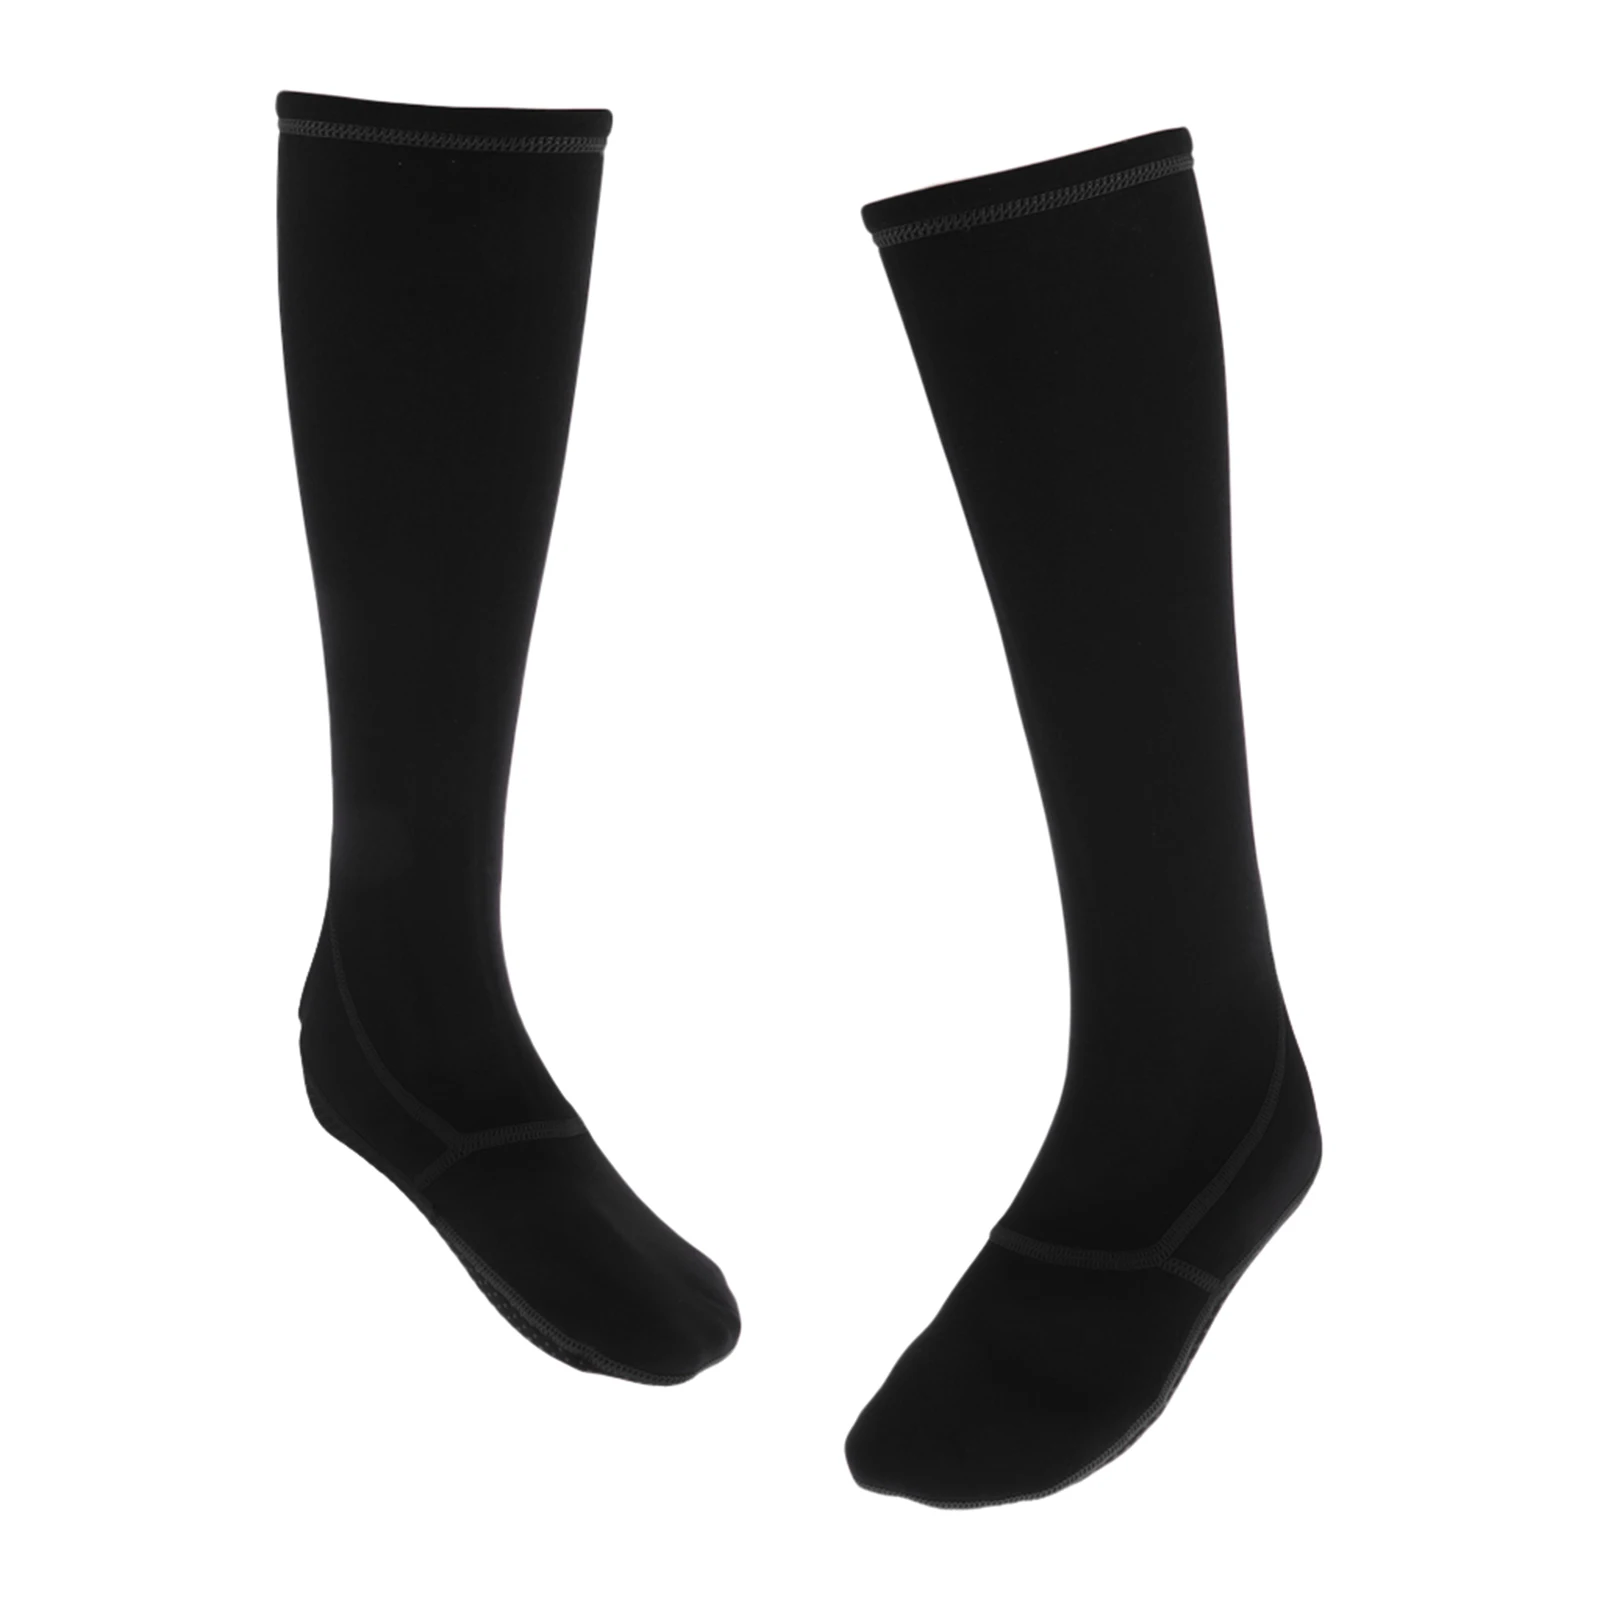 Unisex for 3mm Neoprene Knee High Boots Shoes Details about   PREMIUM Water Fin Socks 